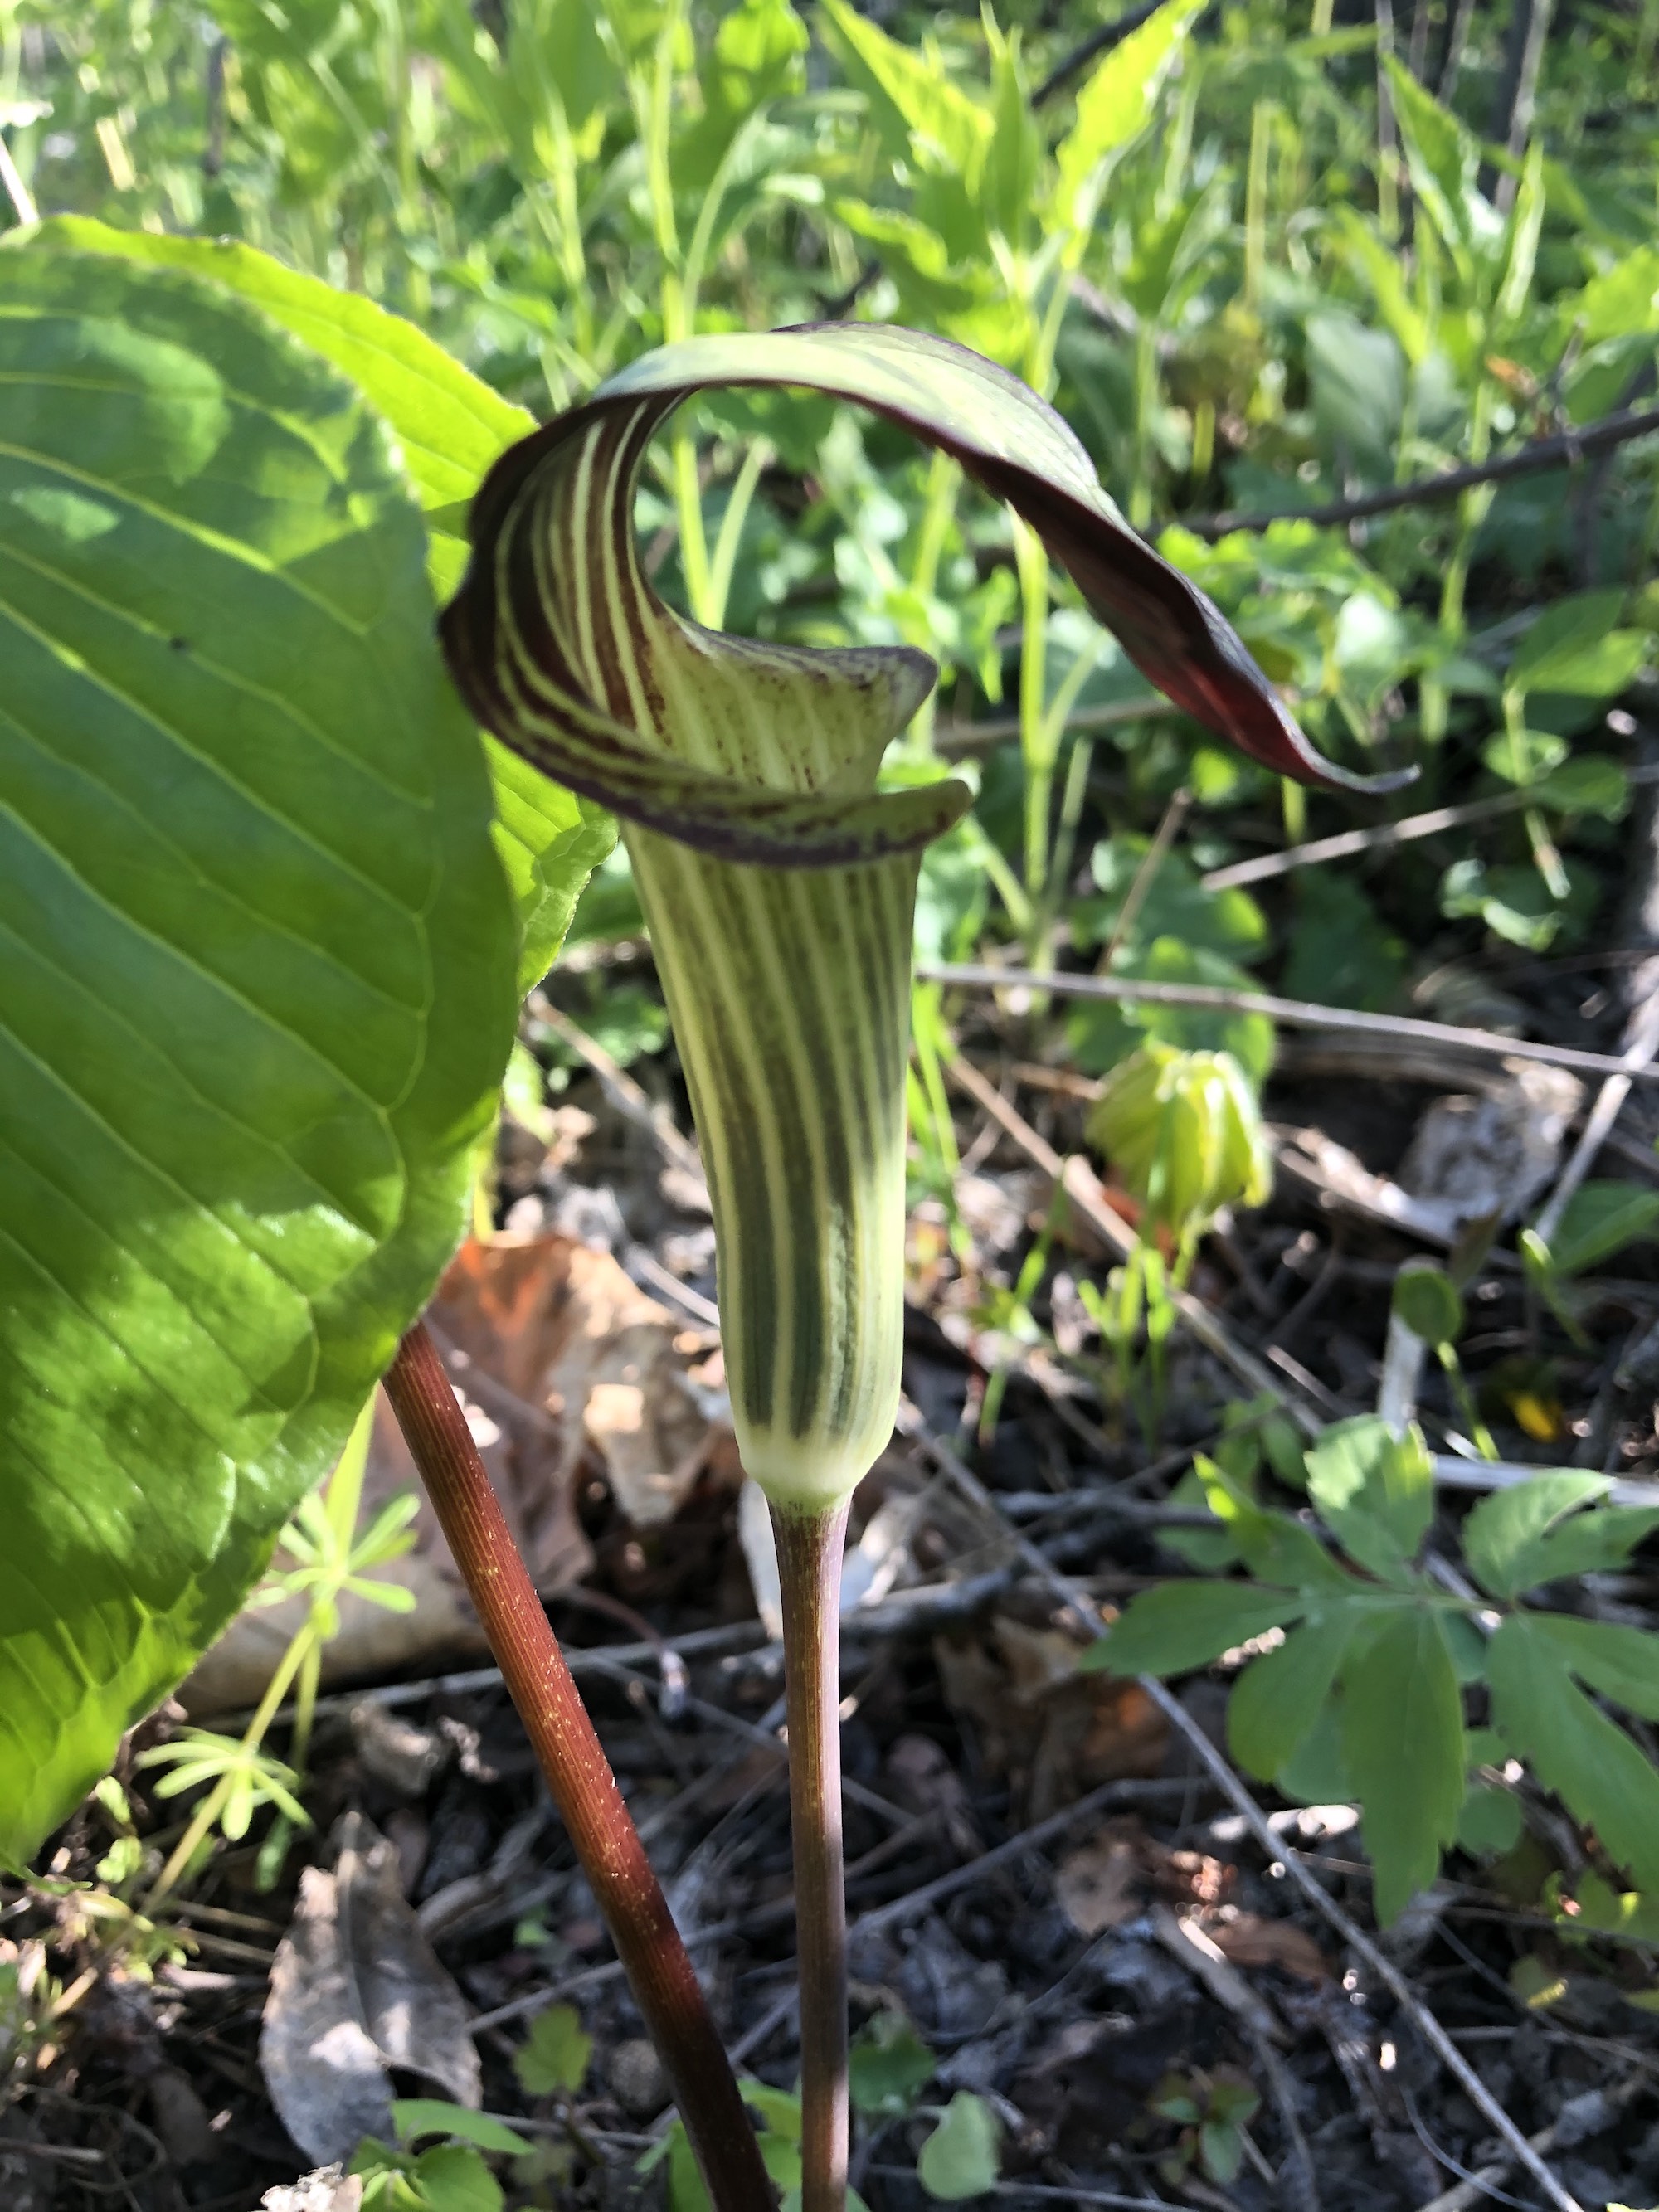 Jack-in-the-pulpit with no "Jack" by Duck Pond parking lot on May 13, 2020